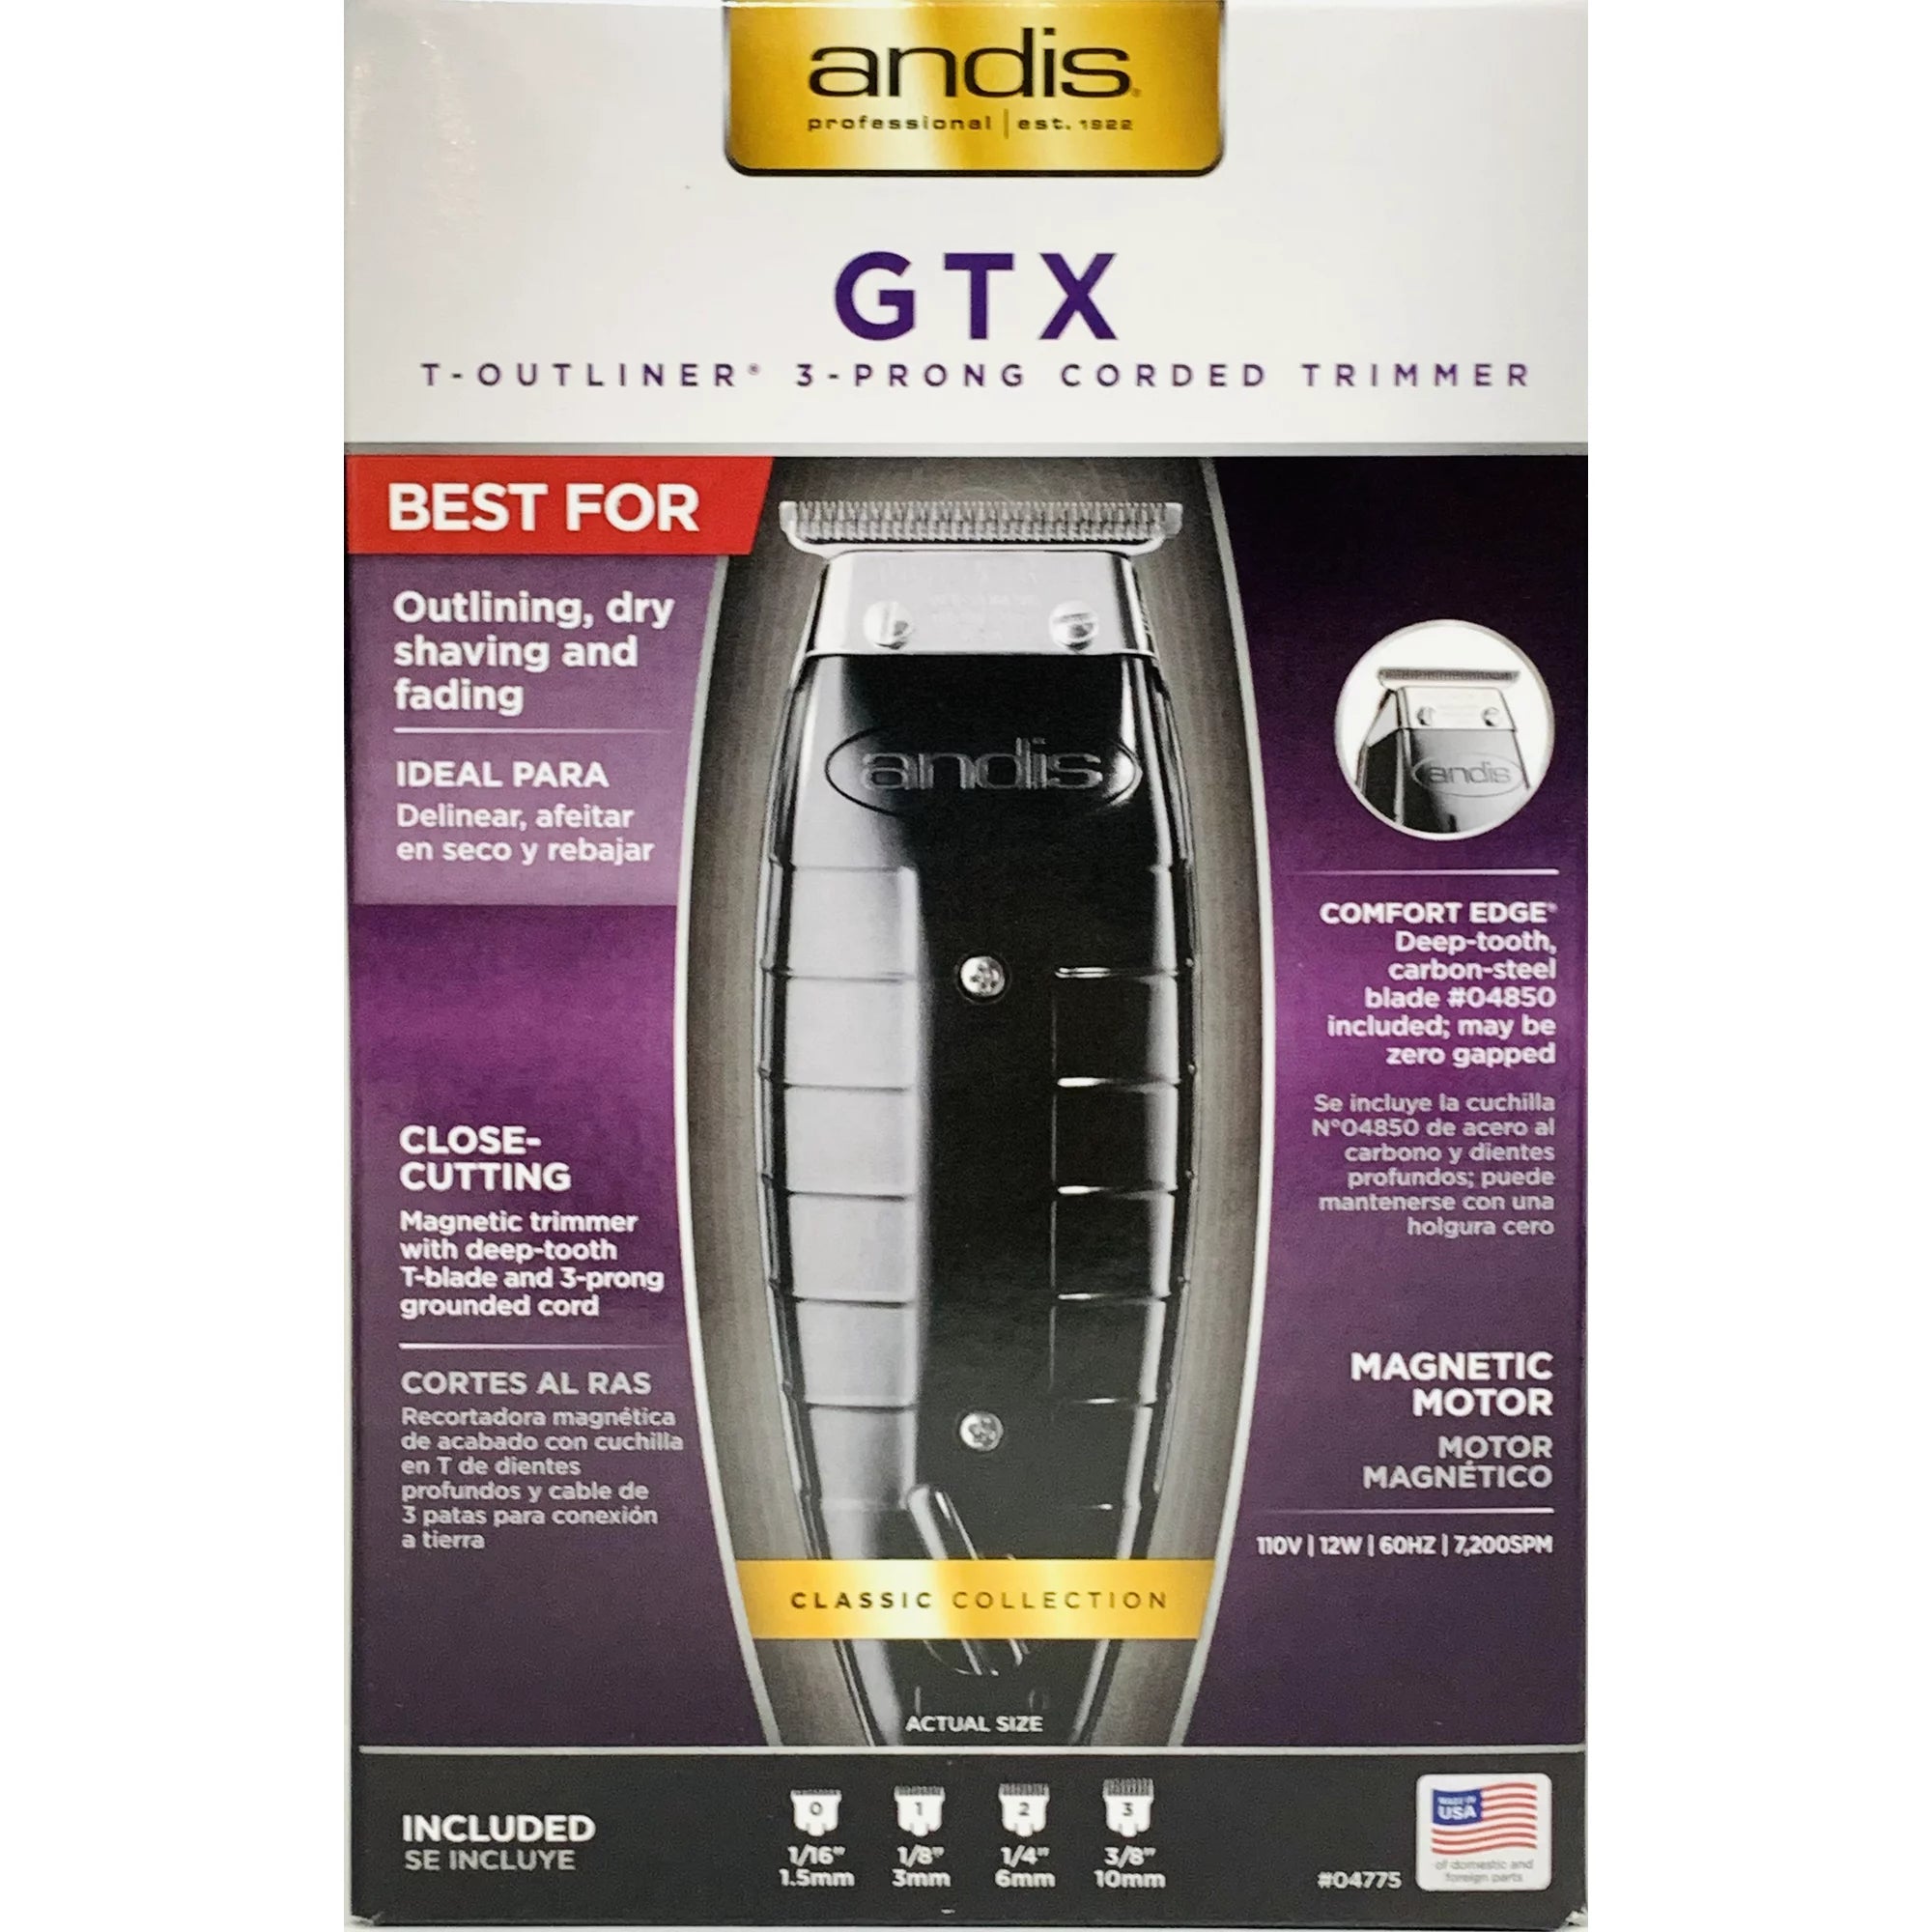 ANDIS GTX T-OUTLINER - 3 PRONG CORDED TRIMMER (#04775)